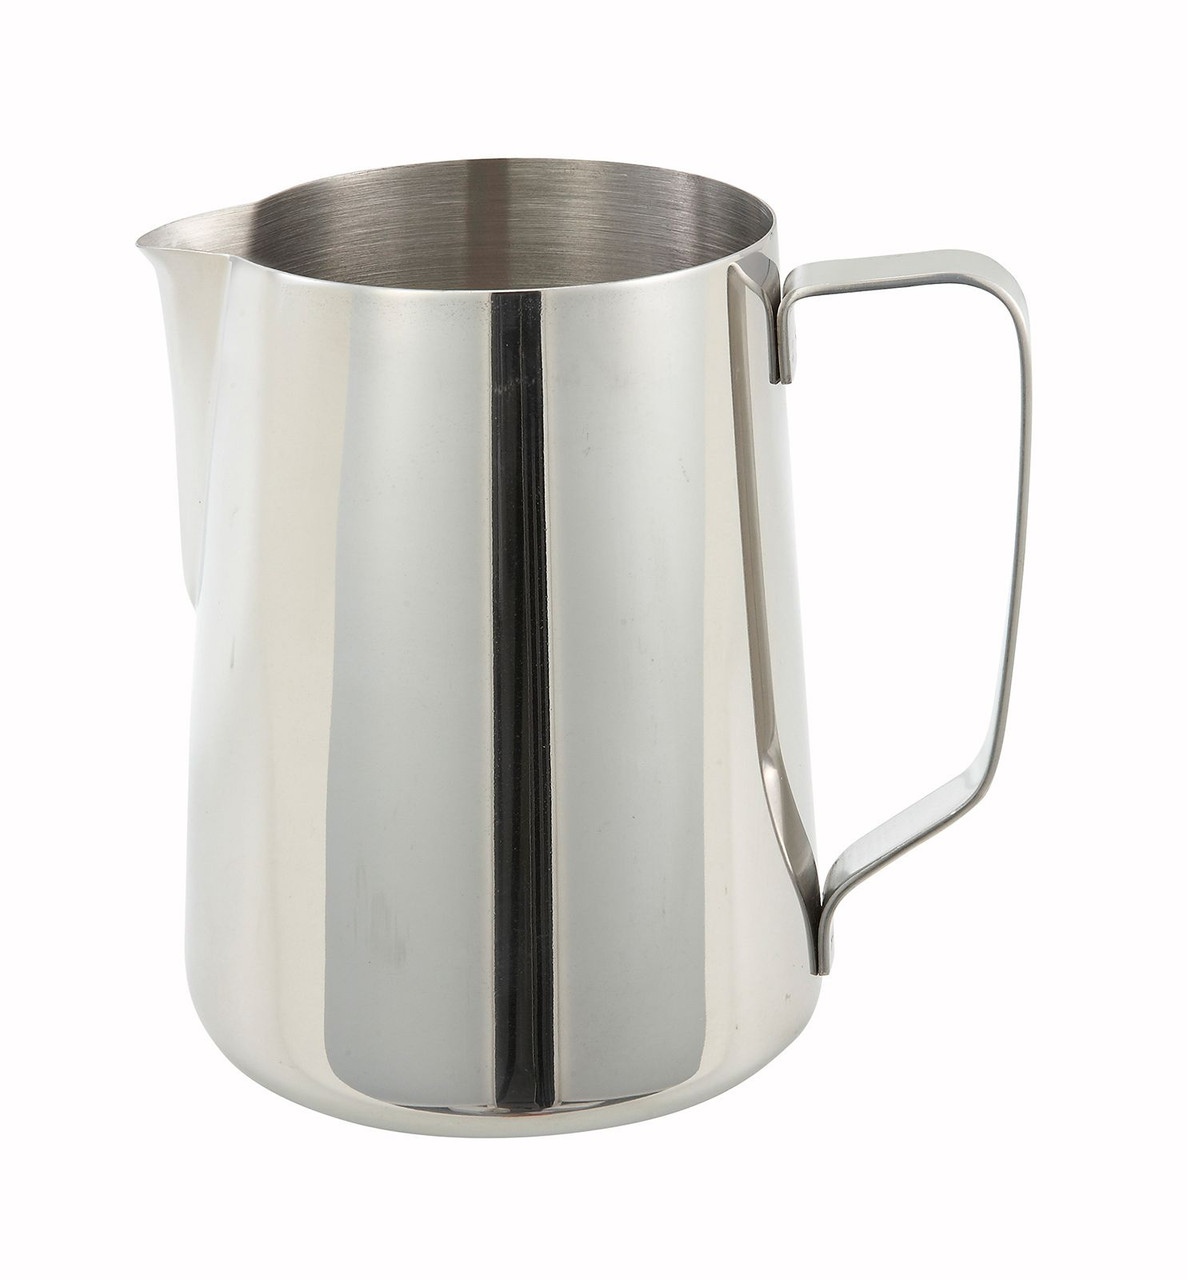 Winco WP-50 50 oz. Stainless Steel Frothing Pitcher